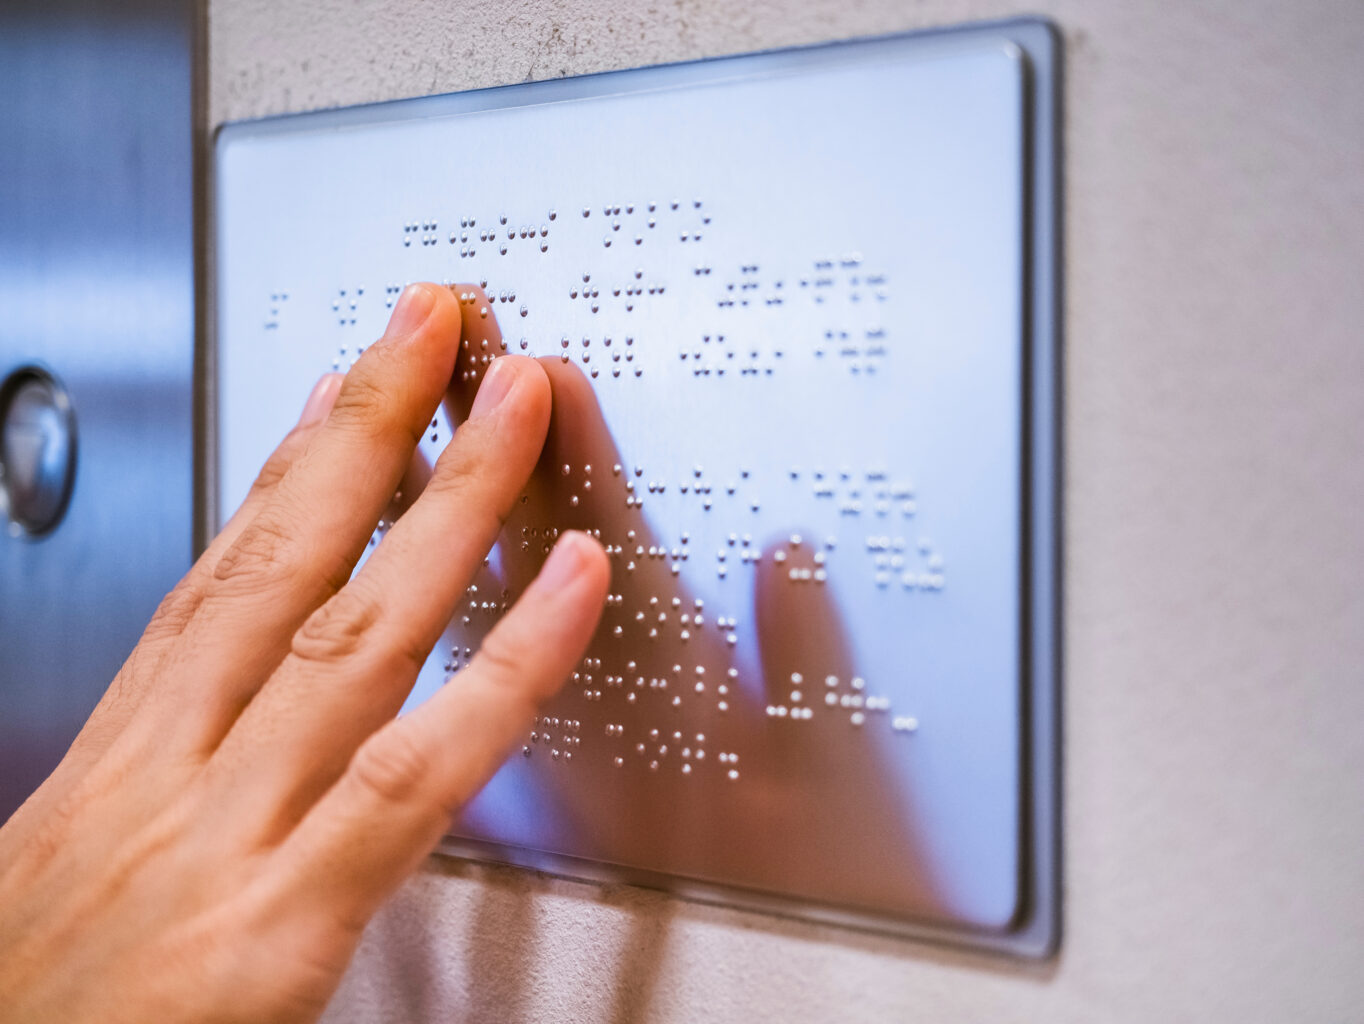 An image of a person touching a sign that’s entirely braille